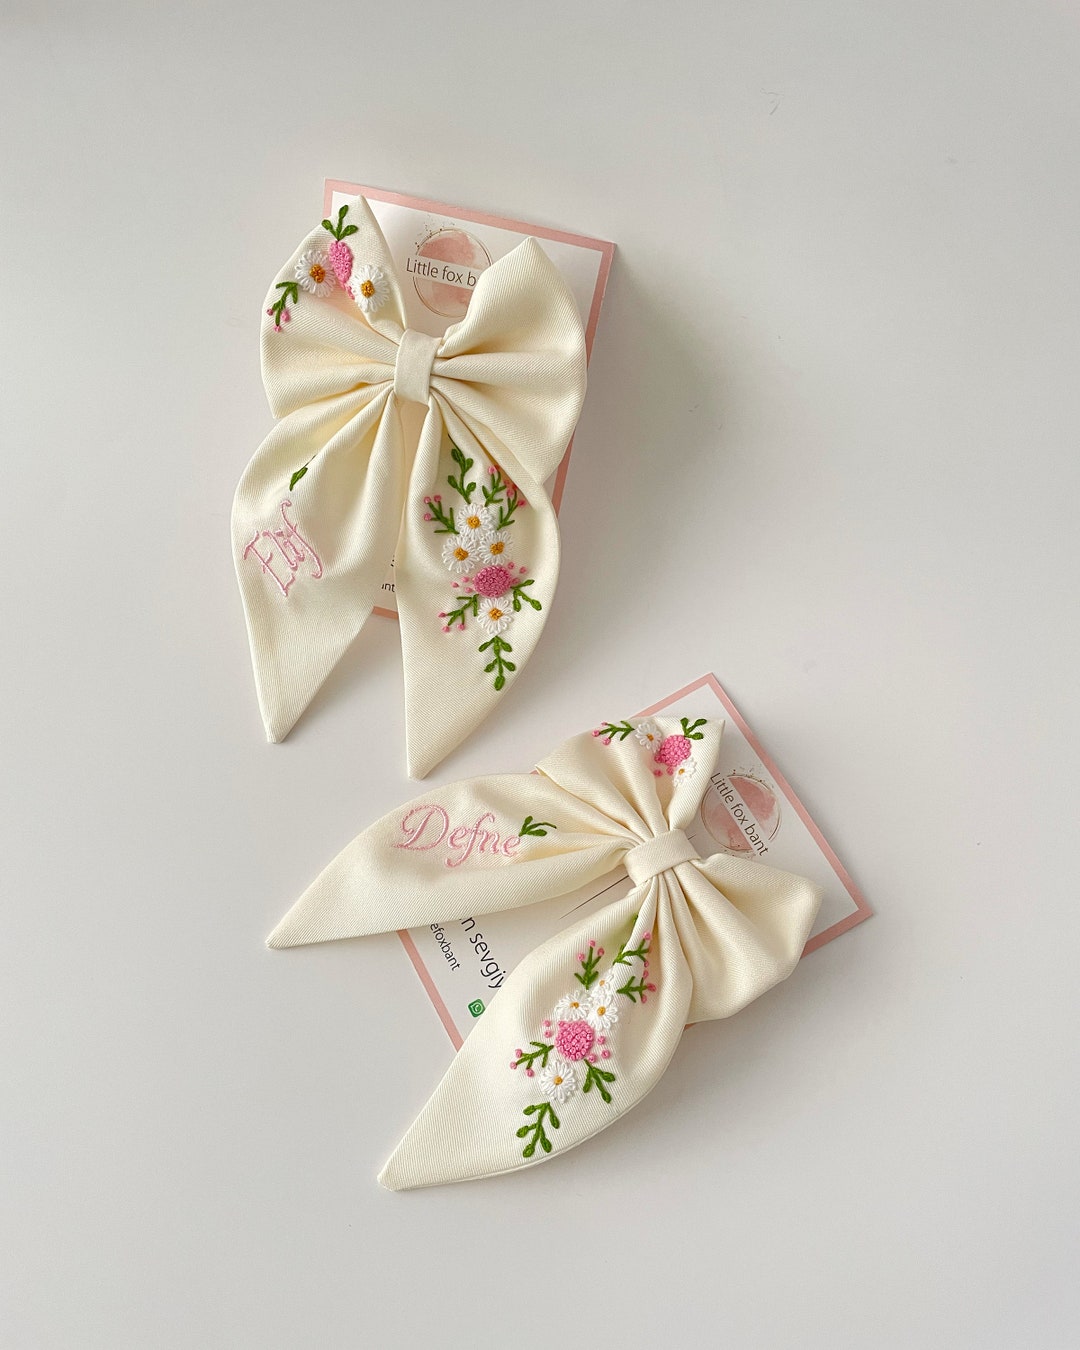  NOLITOY 1 Roll Box Bow Hair Clips Wedding Decorations for  Ceremony Ribbons for Flower Bouquets Ribbon for Bouquet Wedding Hair Clip  Wedding Flowers Decorations Hand Decor Gift Grace Fabric : Health